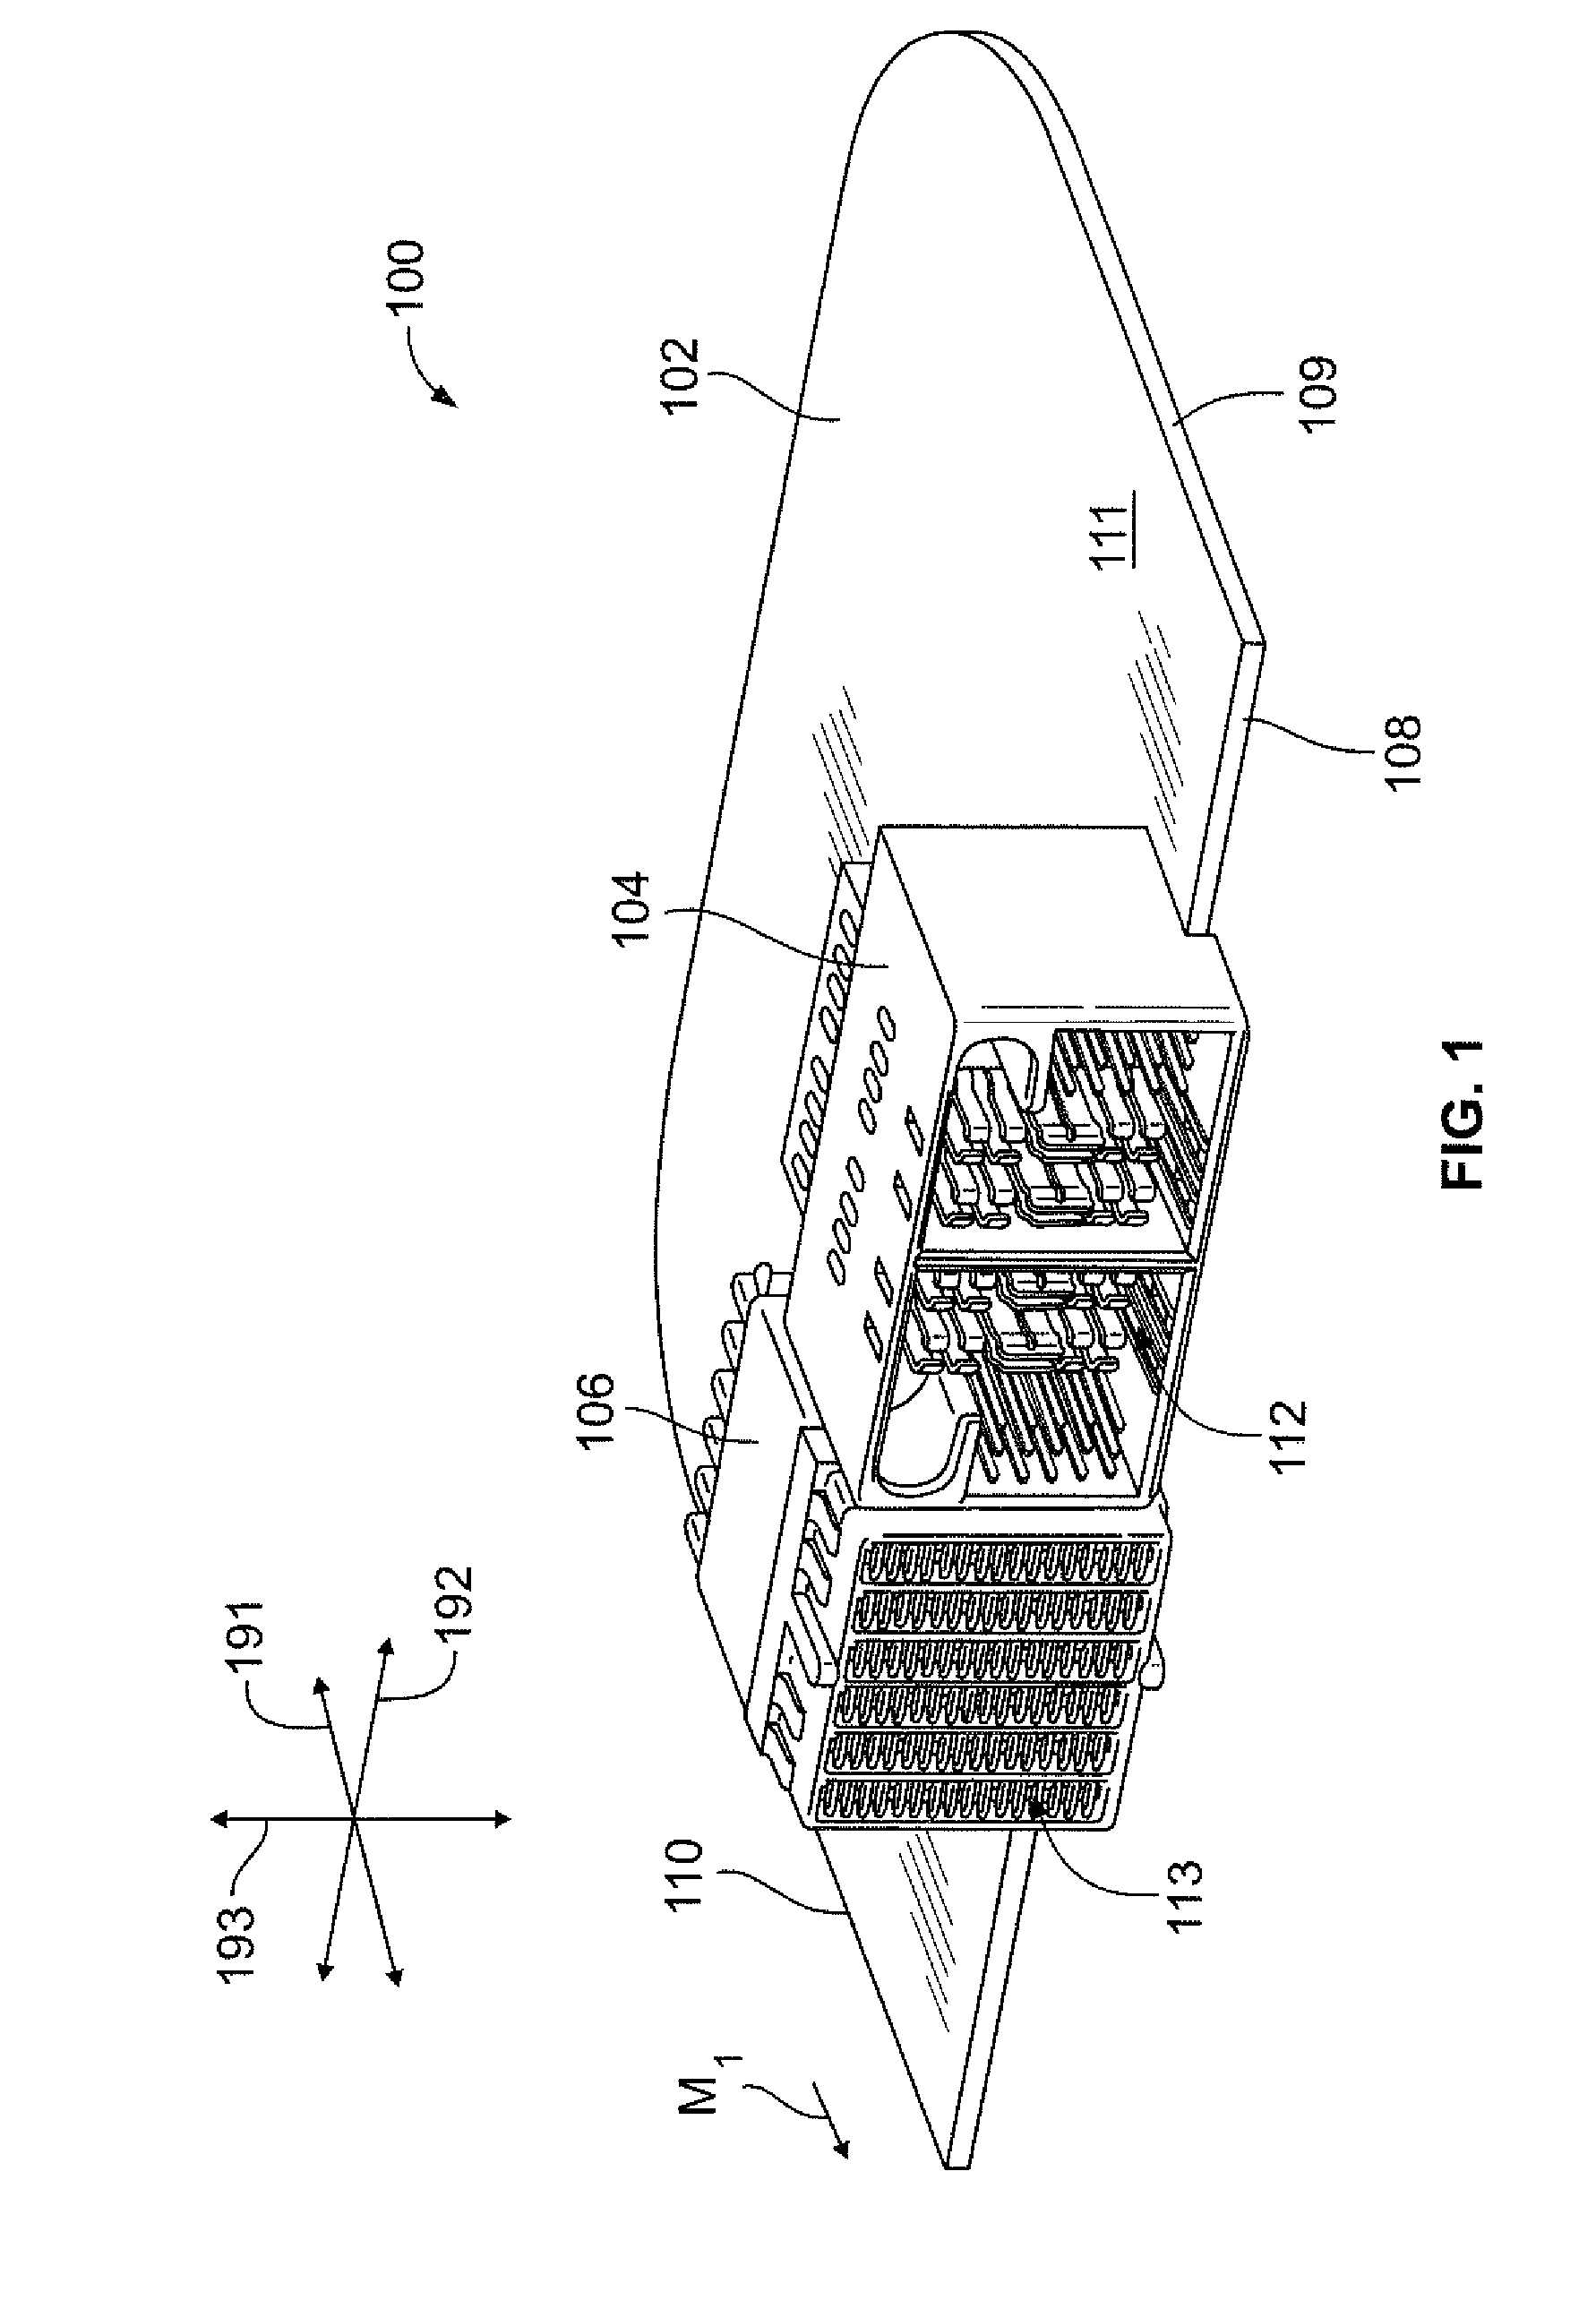 Electrical connector having an electrical contact with a plurality of contact beams